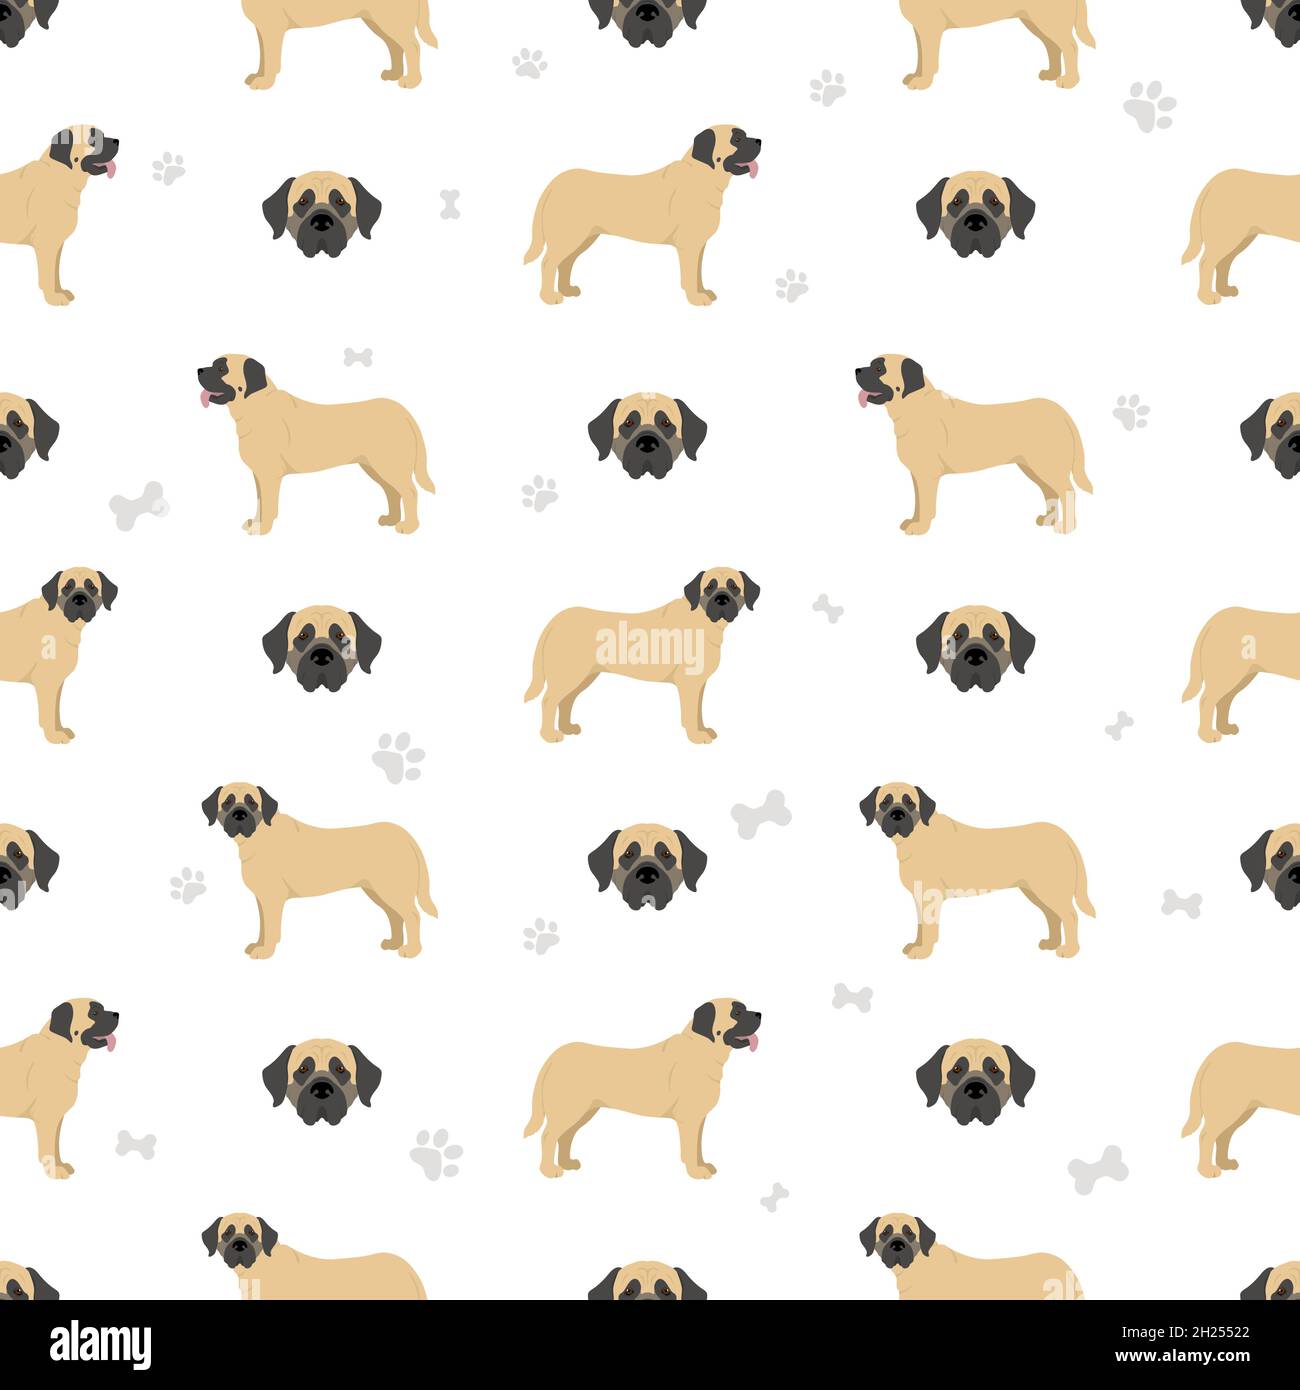 Old English Sheepdog Clipart. Different Poses, Coat Colors Set. Vector  Illustration Royalty Free SVG, Cliparts, Vectors, and Stock Illustration.  Image 180926946.